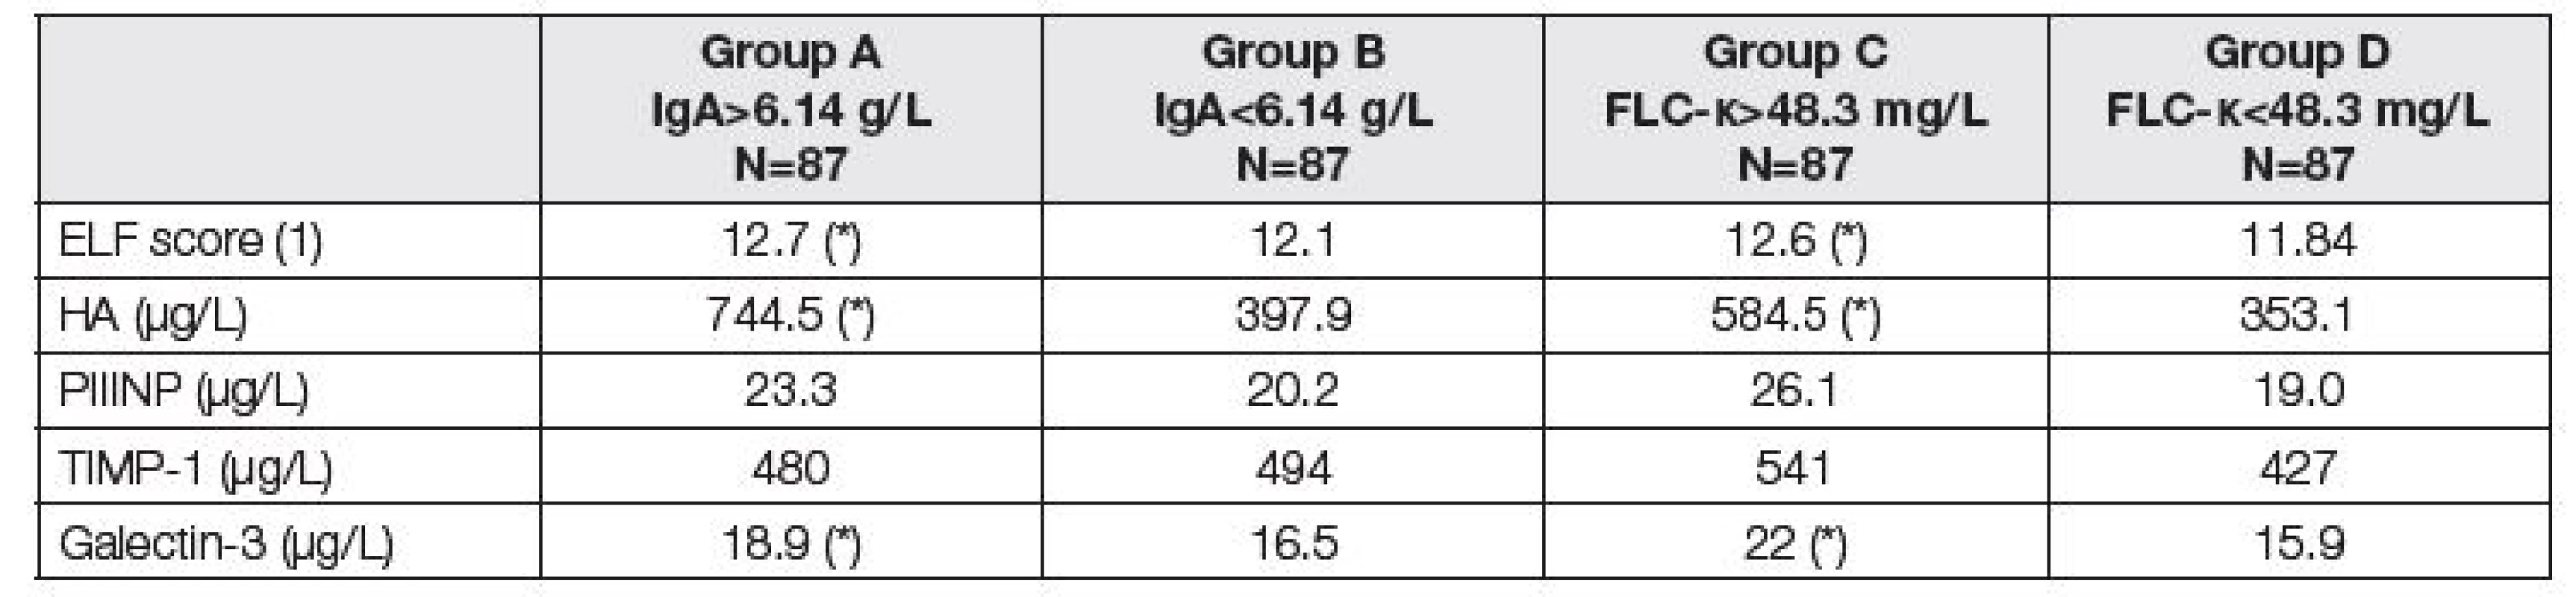 Medians of biomarkers of liver fibrosis before LTx. Comparison of two subgroups with respect to different criteria.
Groups A and B according to the total IgA; group A above median of 6.14 g/L, group B up to median of 6.14 g/L. Groups C
and D according to the FLC-κ; group C above median of 48.3 mg/L, group D up to median of 48.3 mg/L). Asterisk (*) means
significant difference between group A and B, or C and D, respectively (Mann-Whitney test).